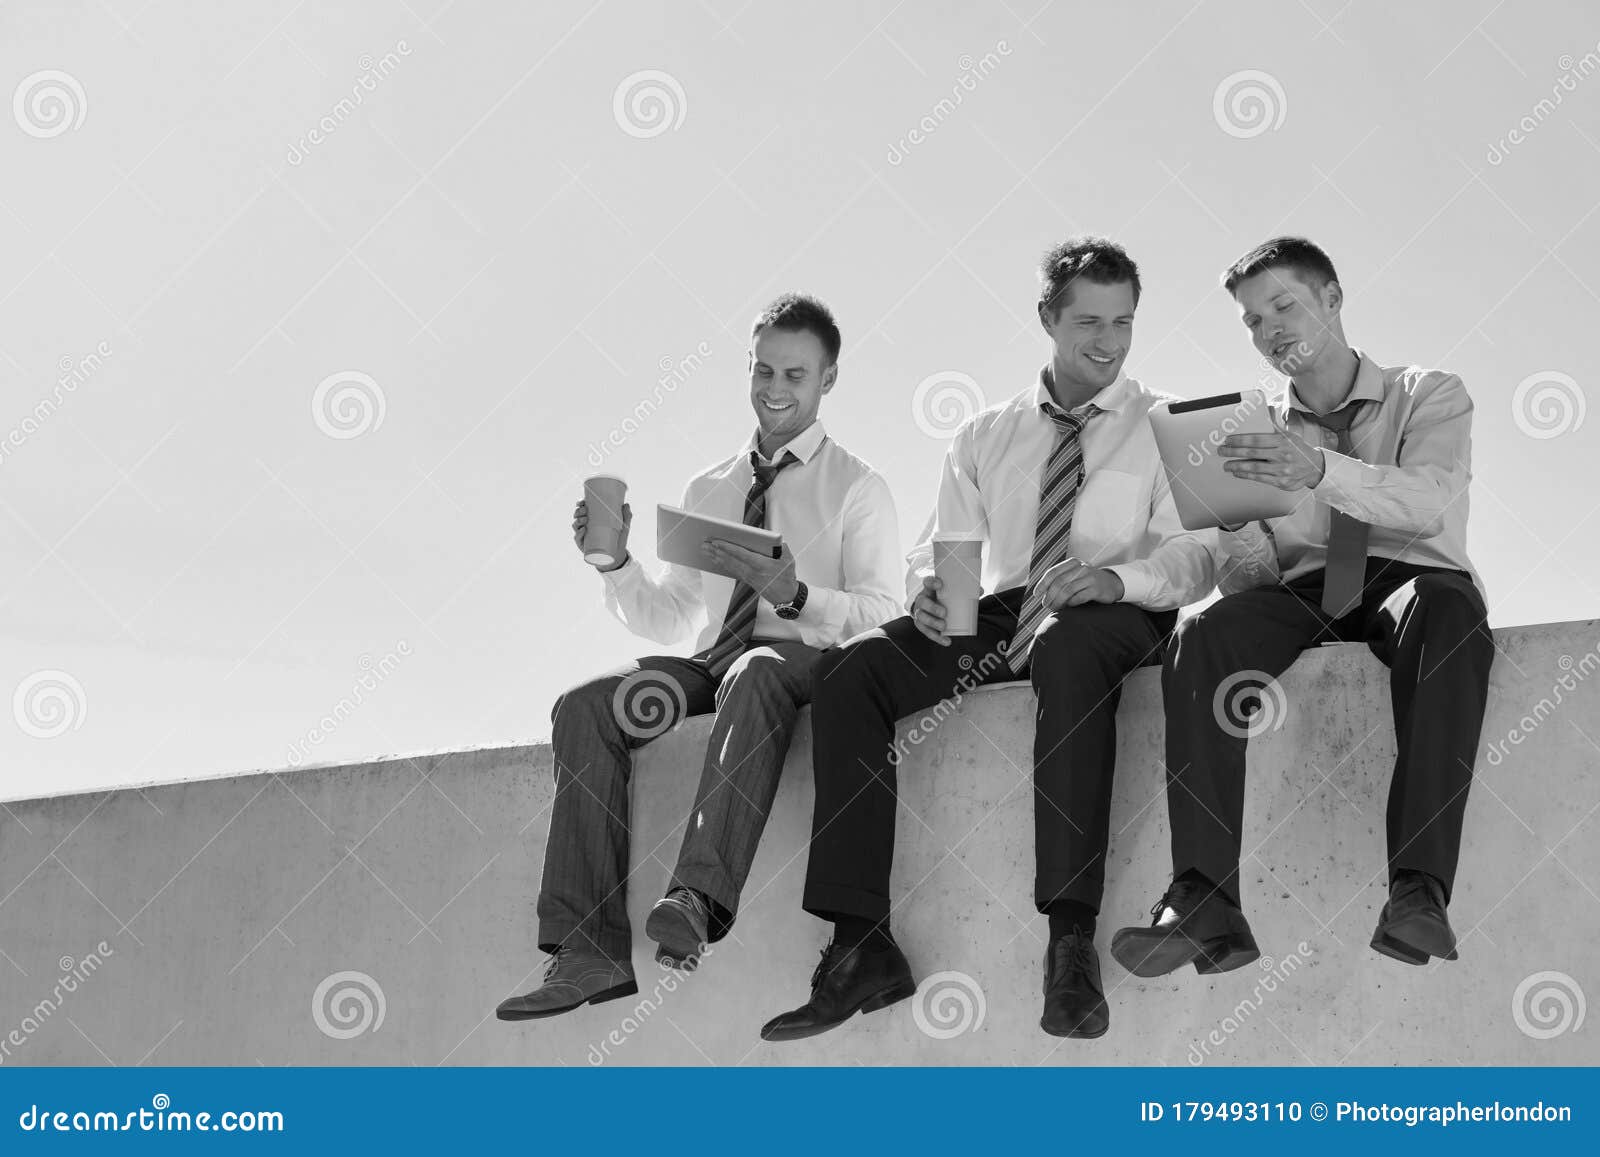 black and white photo of thoughtful businessmen sitting while using digita tablet in office rooftop